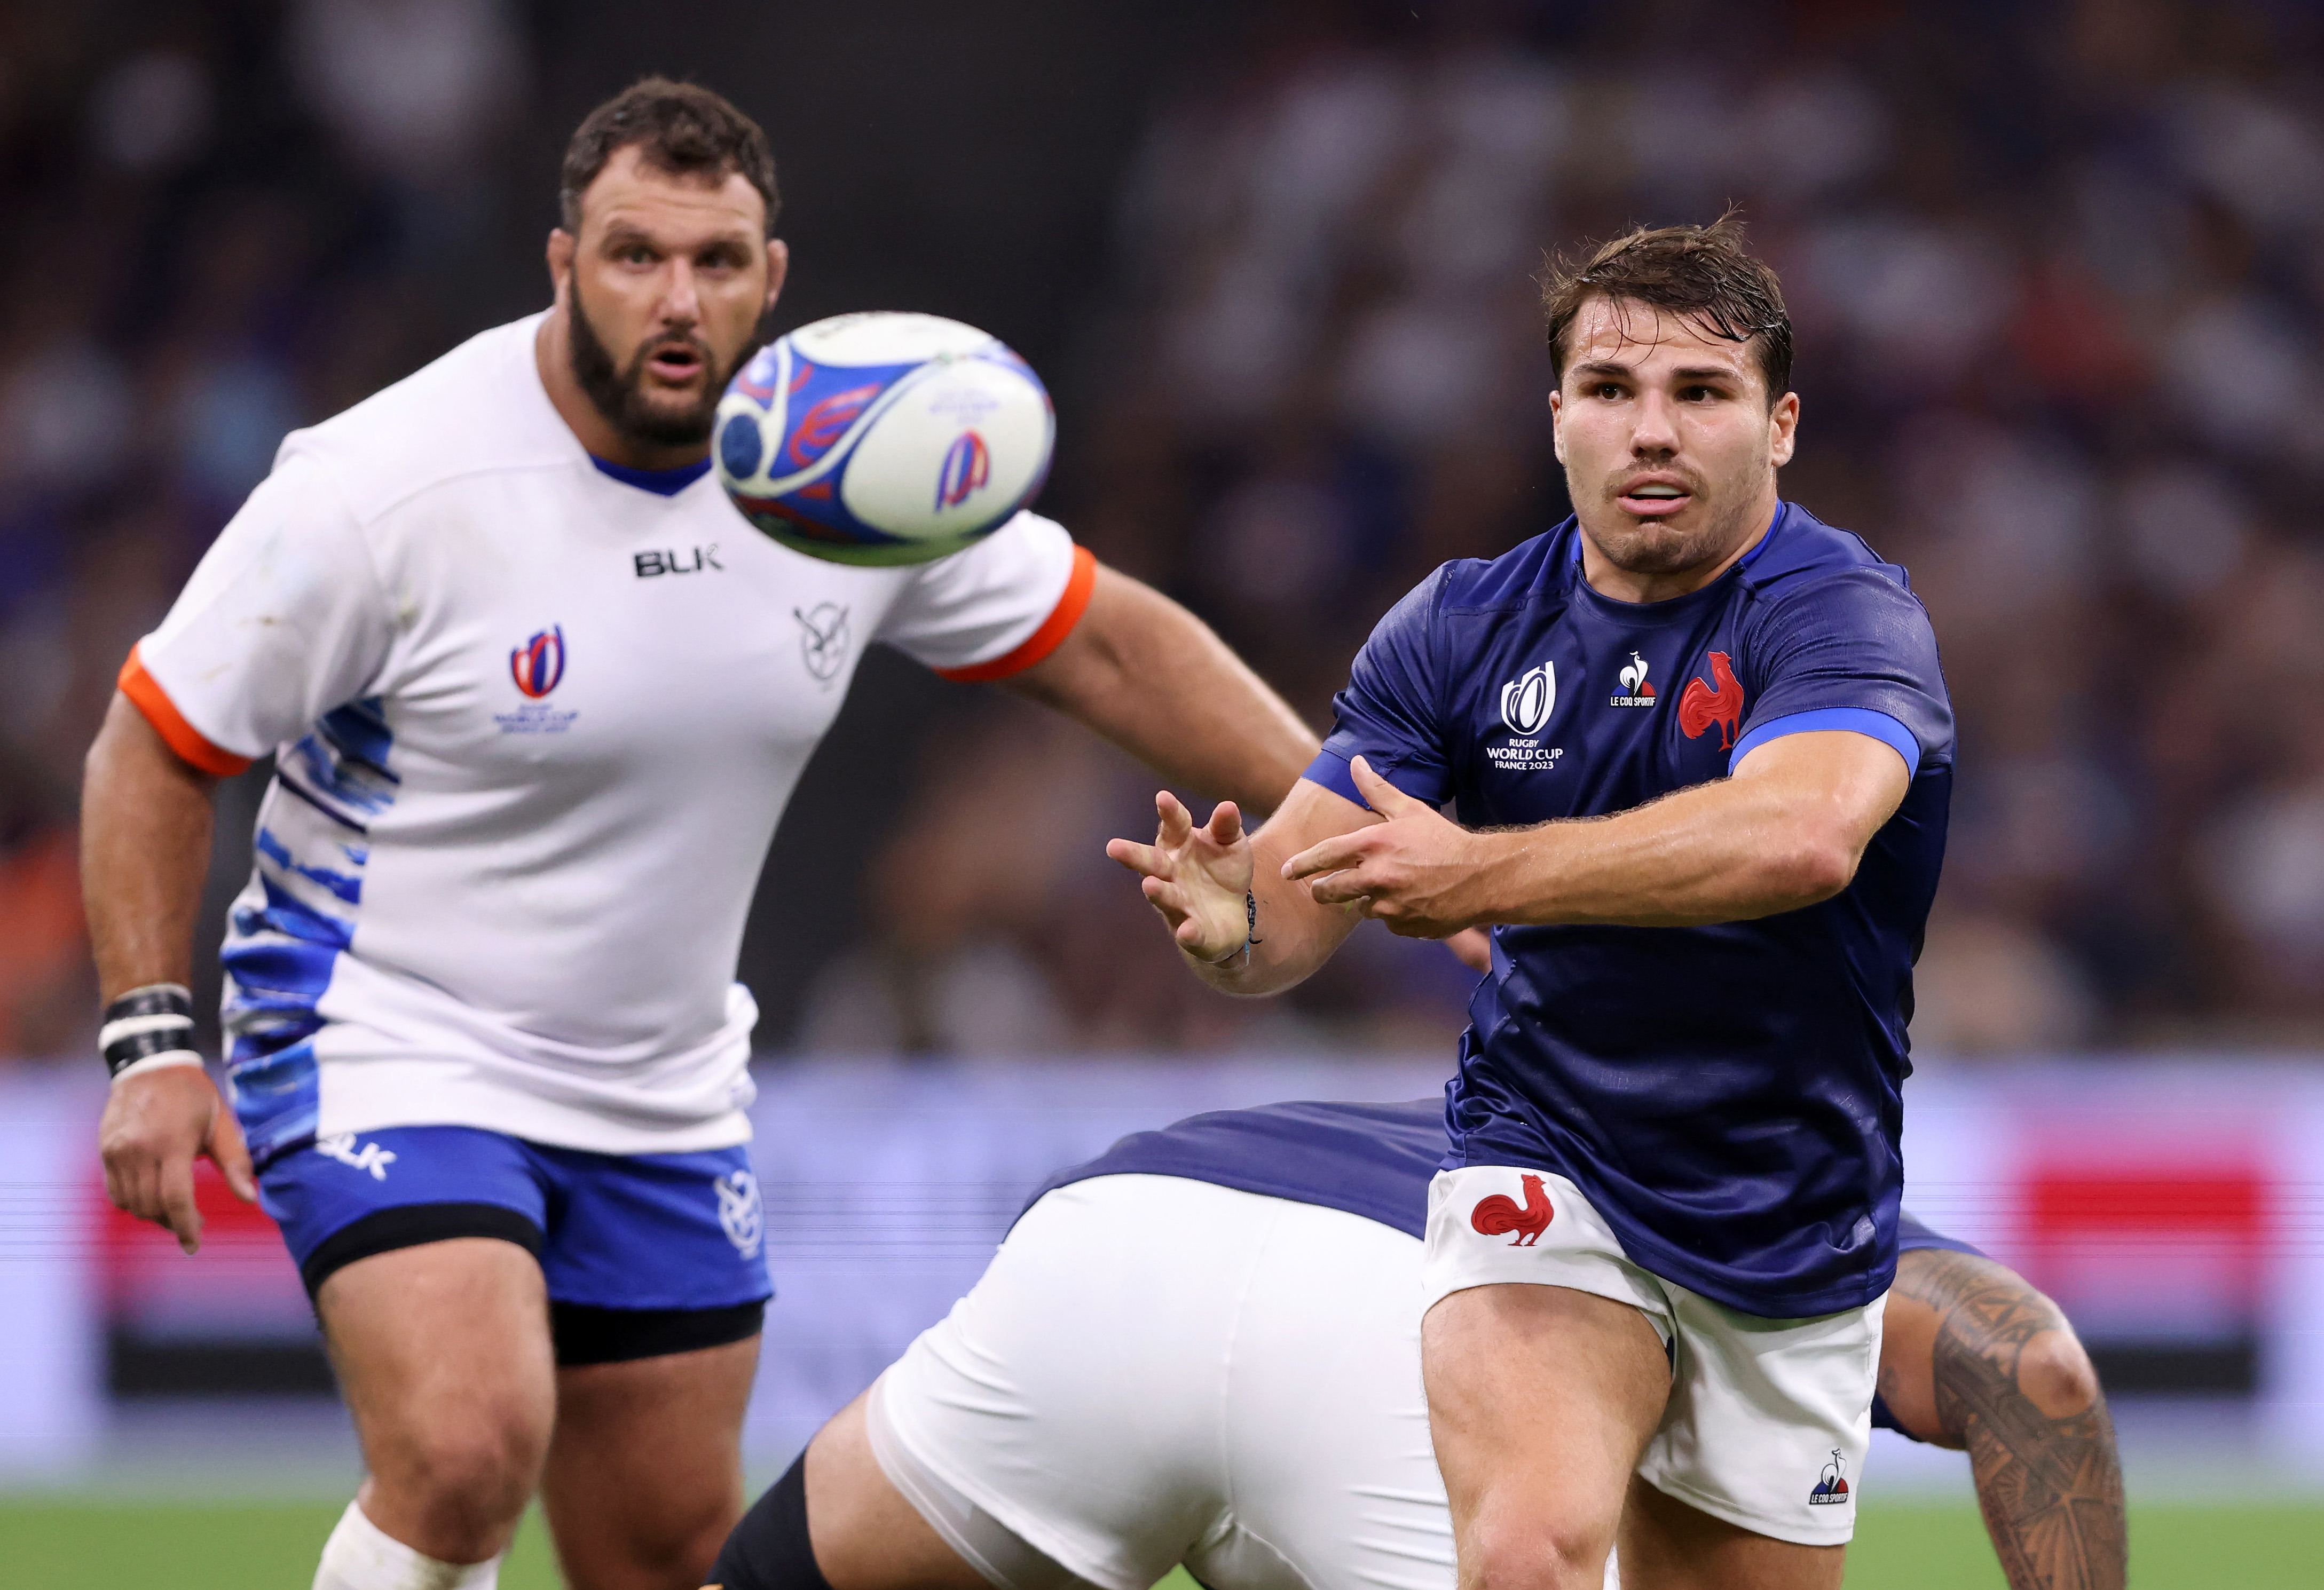 Antoine Dupont passes the ball in France's match against Namibia.